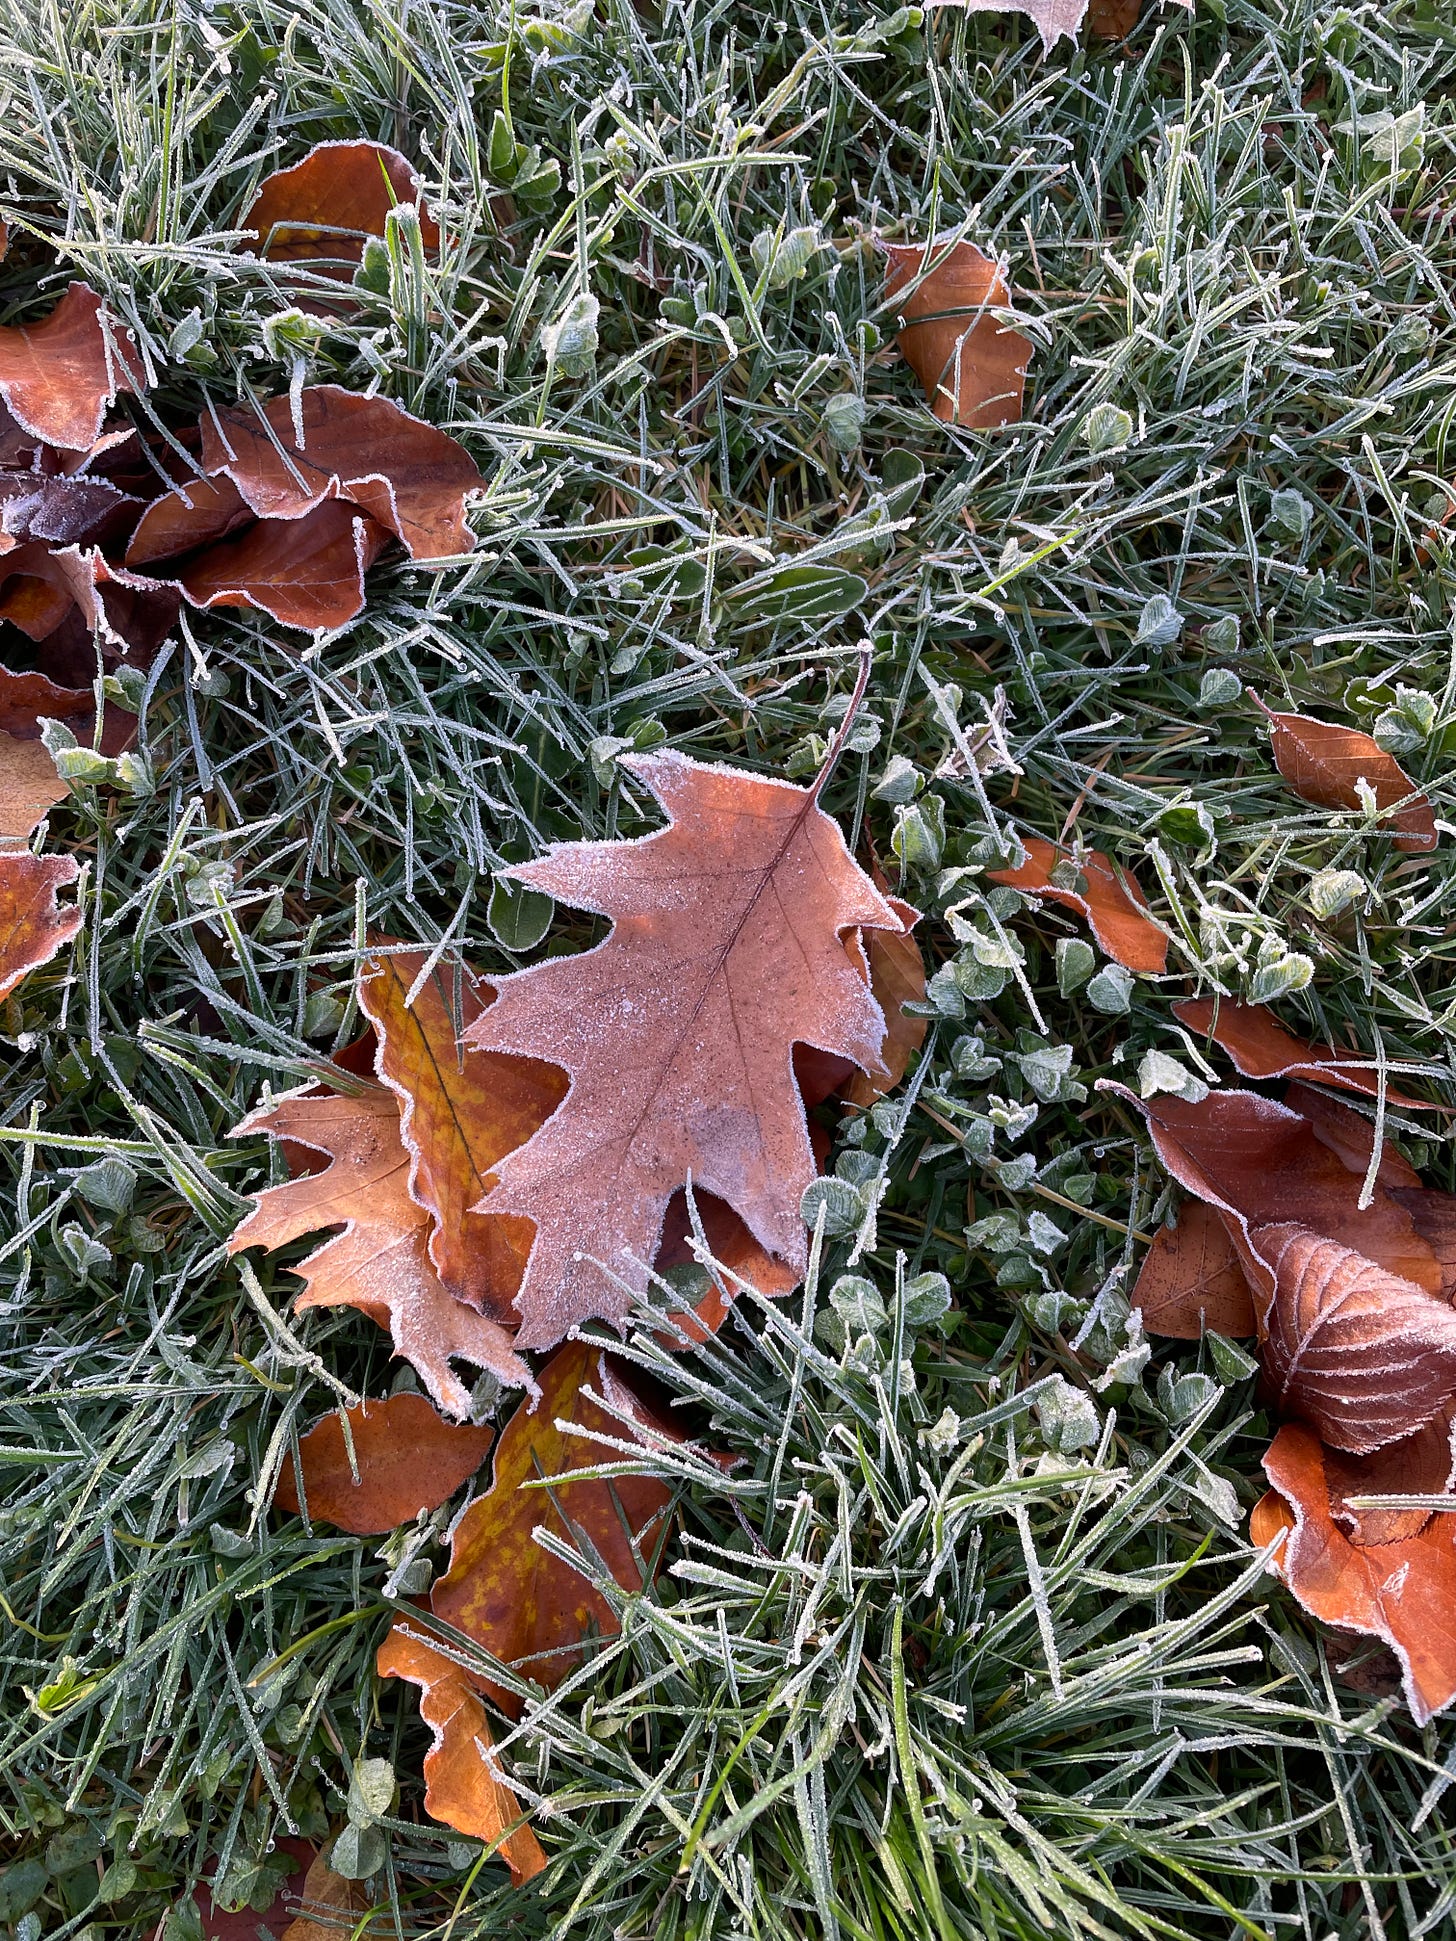 green grass is covered in a light white frost. There are brown leaves scattered throughout, curling up with their edges covered in ice